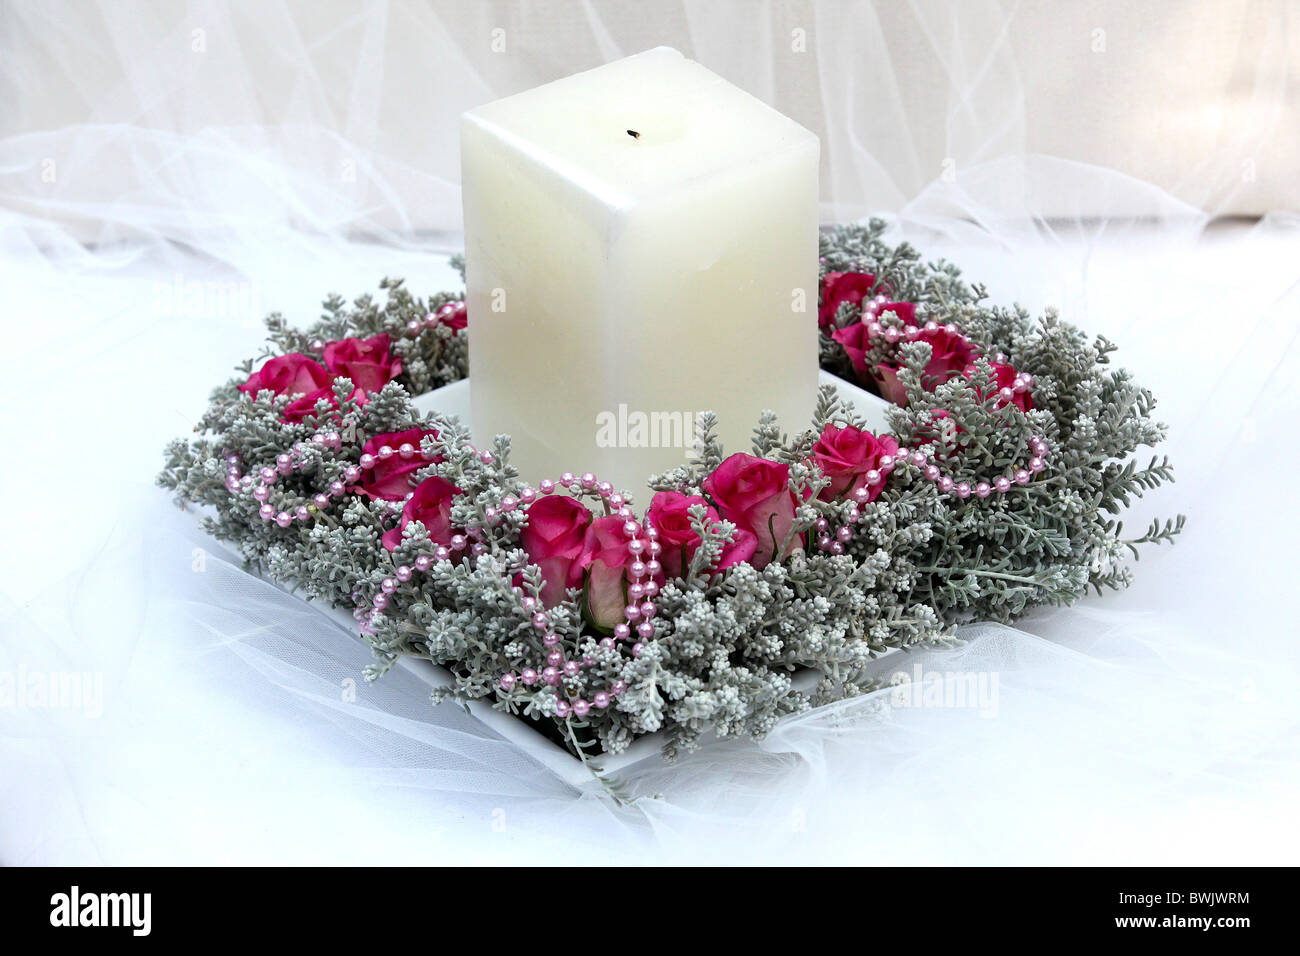 Flower Arrangement with candle on white Stock Photo